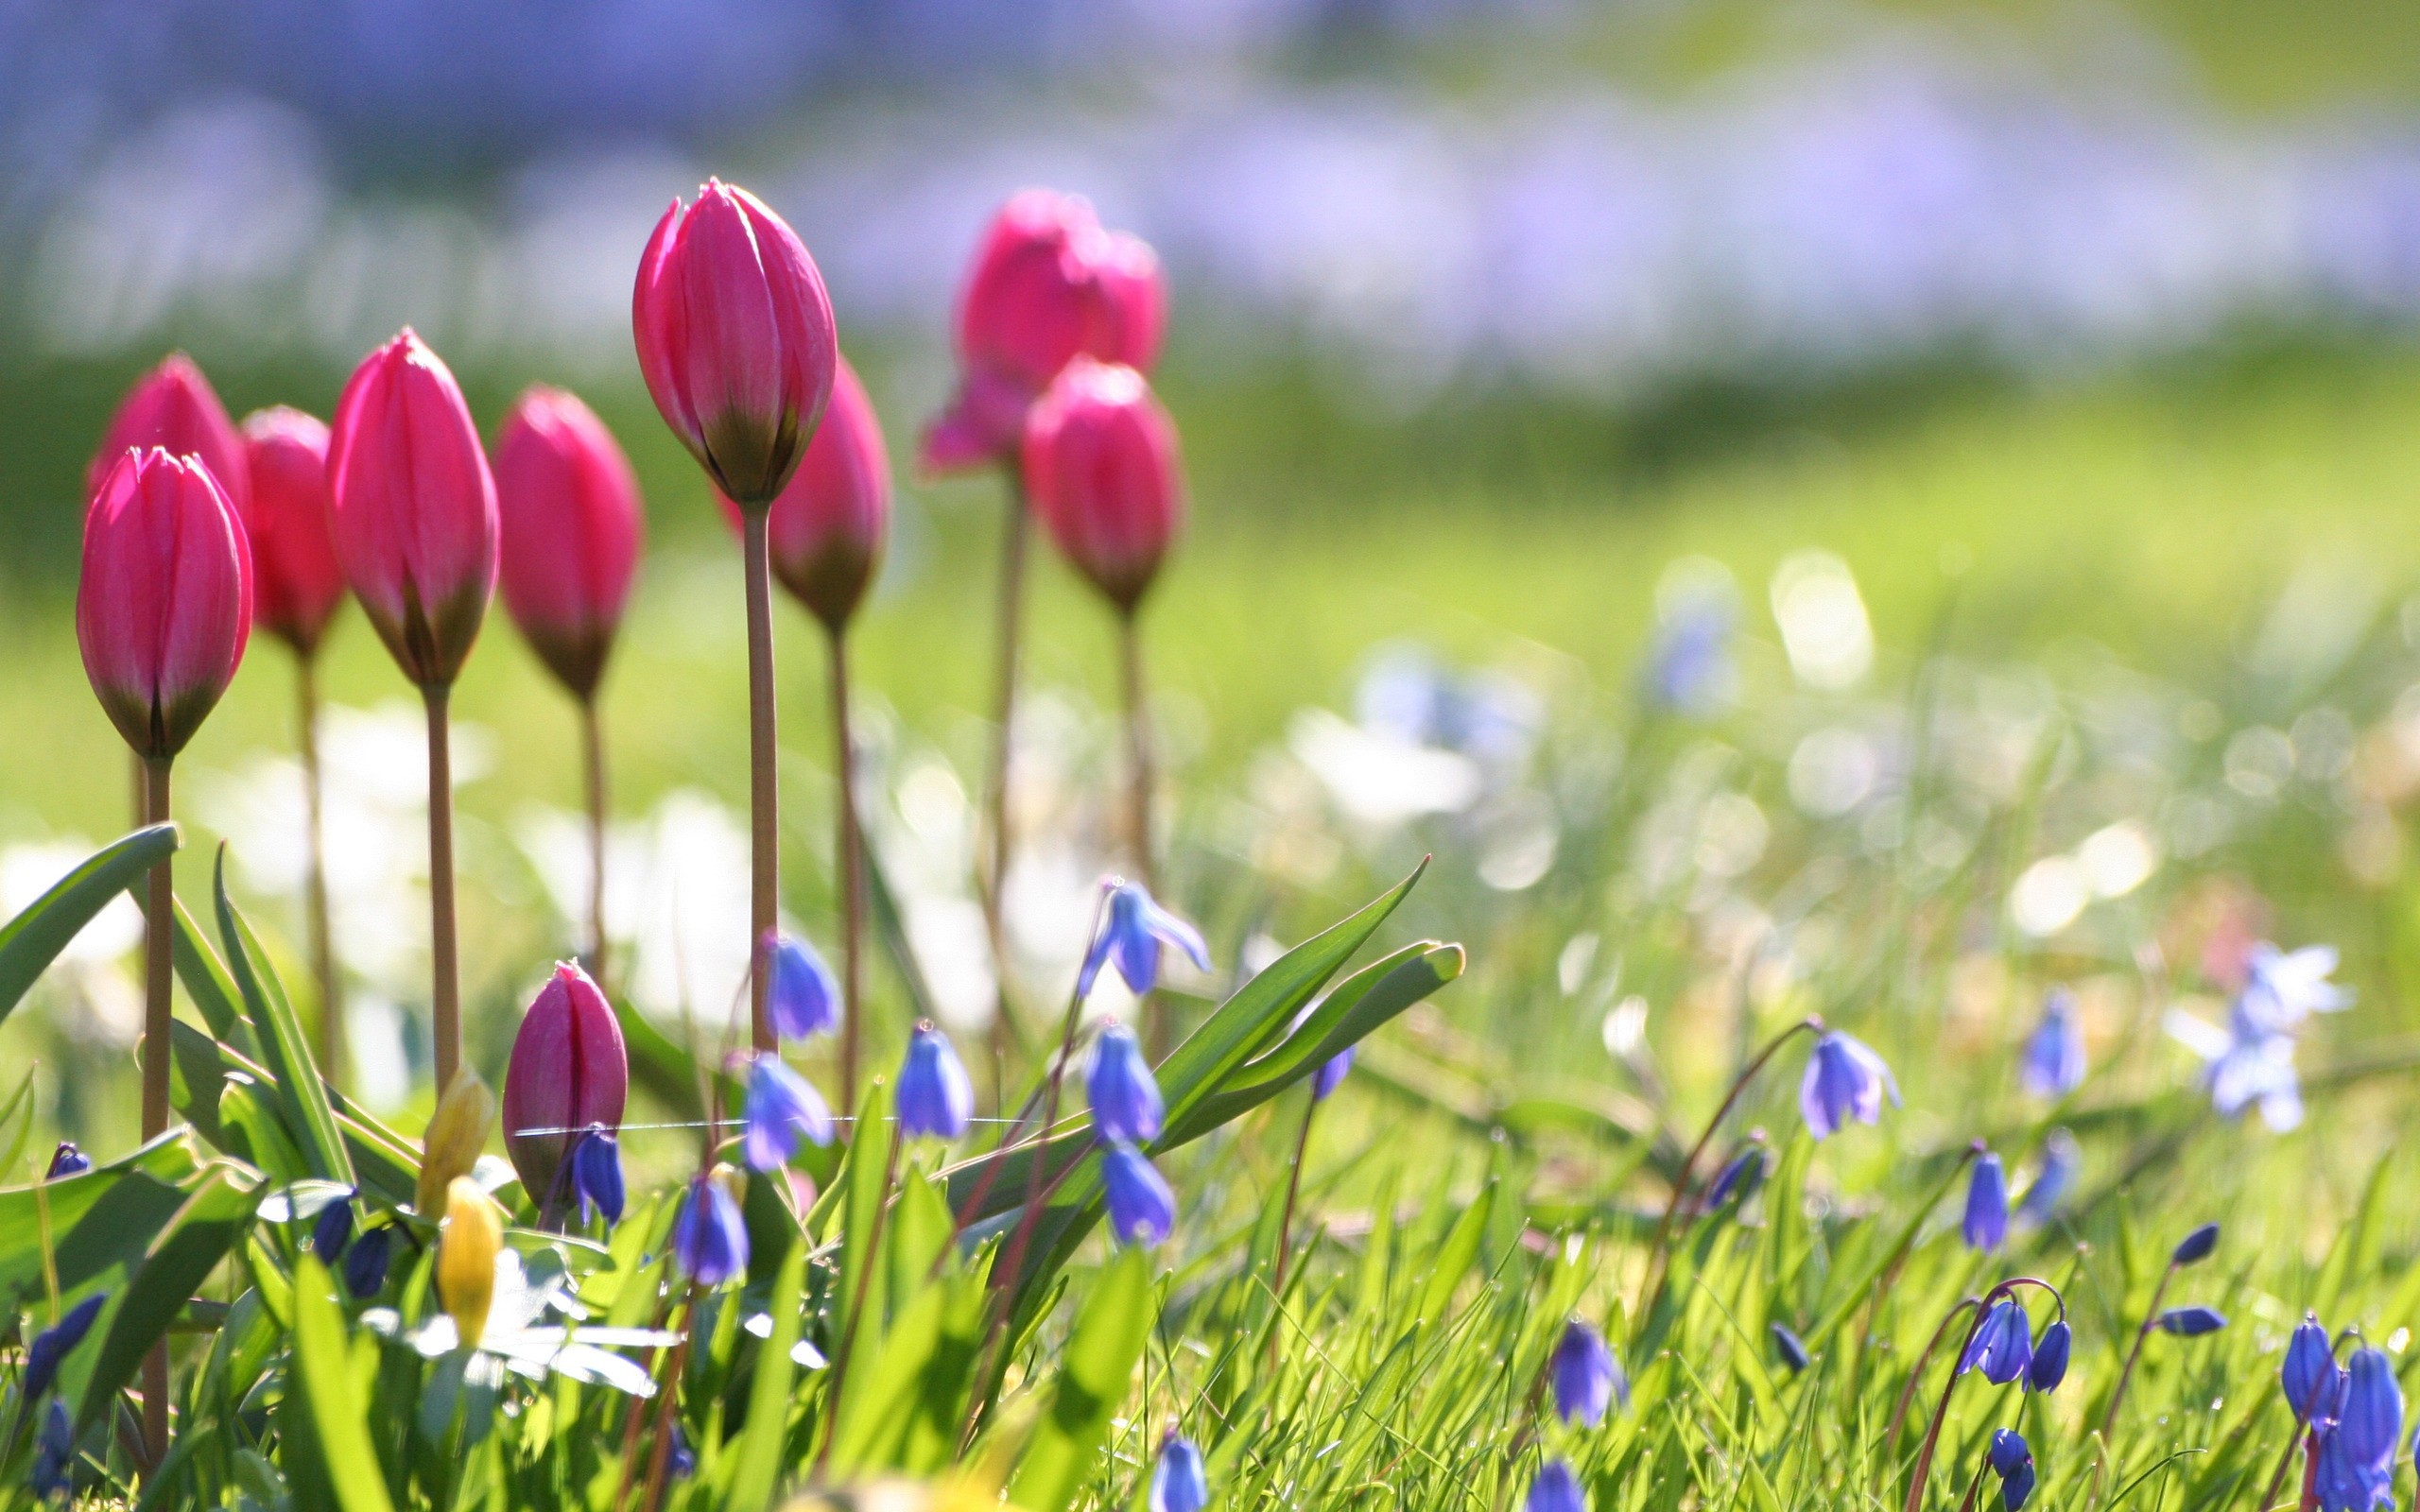 Nature___Flowers_The_buds_of_tulips_042892_.jpg